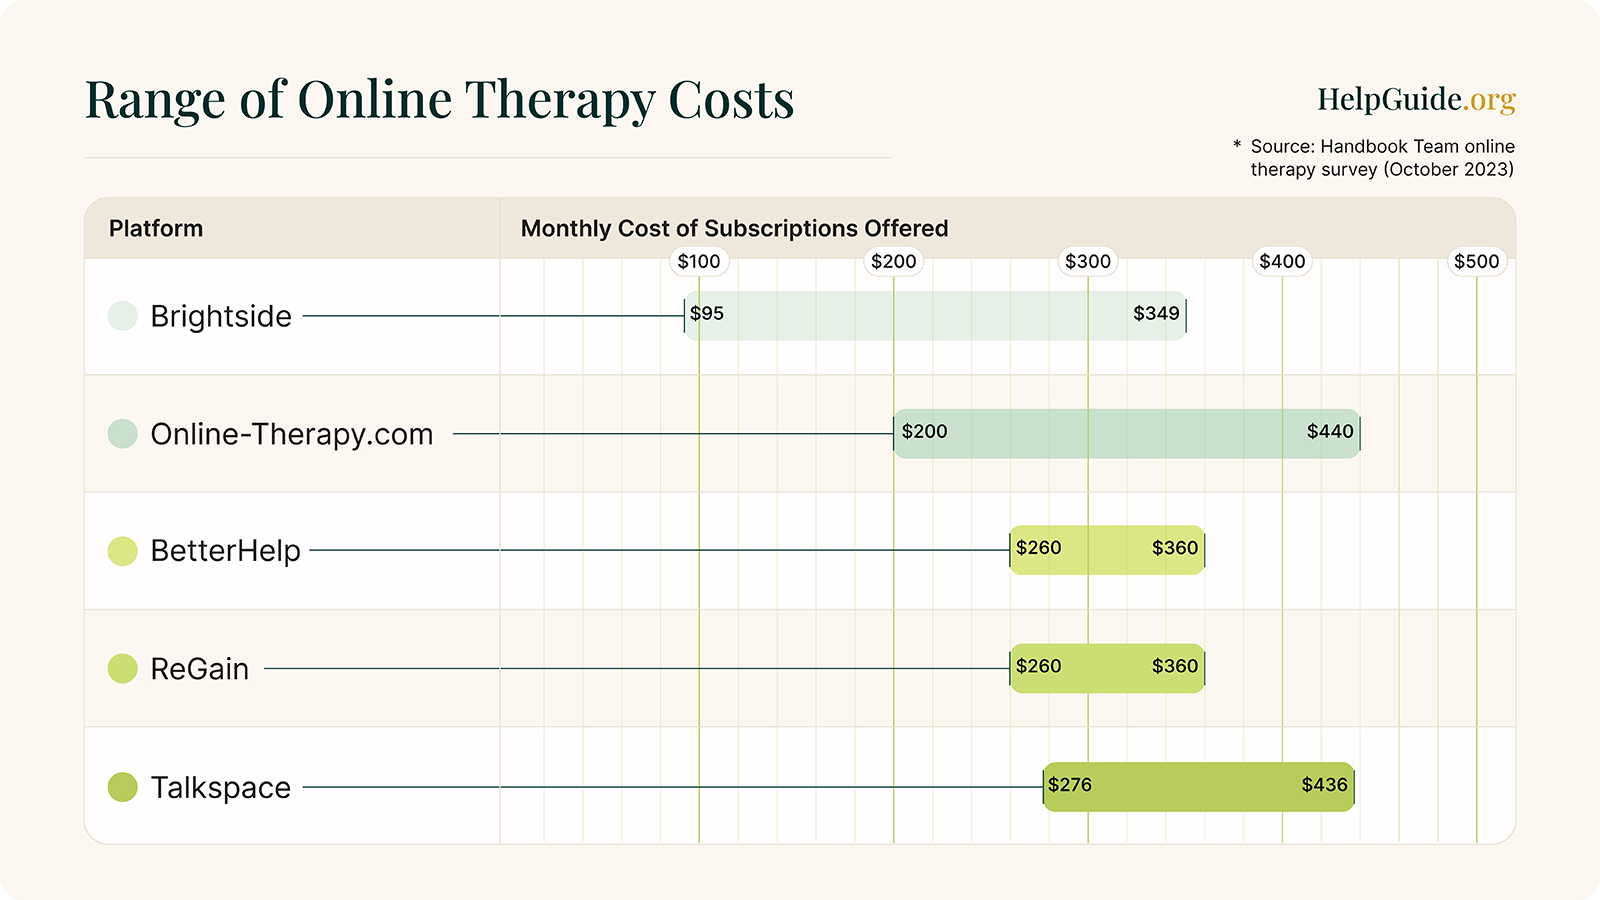 range of online therapy subscription costs by platform